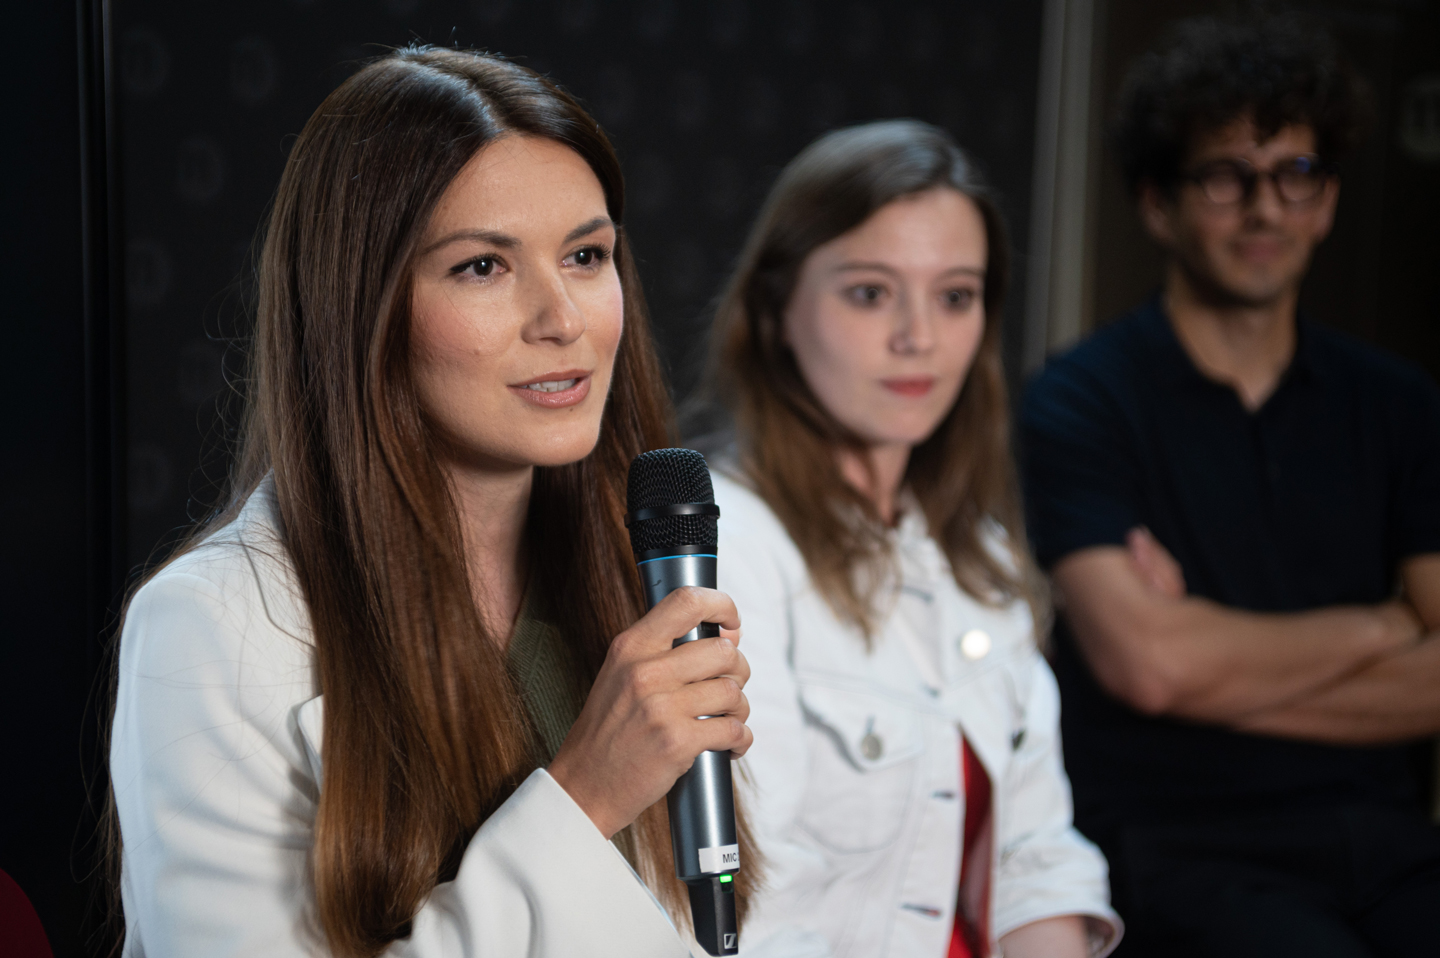 An extraordinary panel of experts debated the future of the perfume industry during the event hosted by Istituto Marangoni in Paris